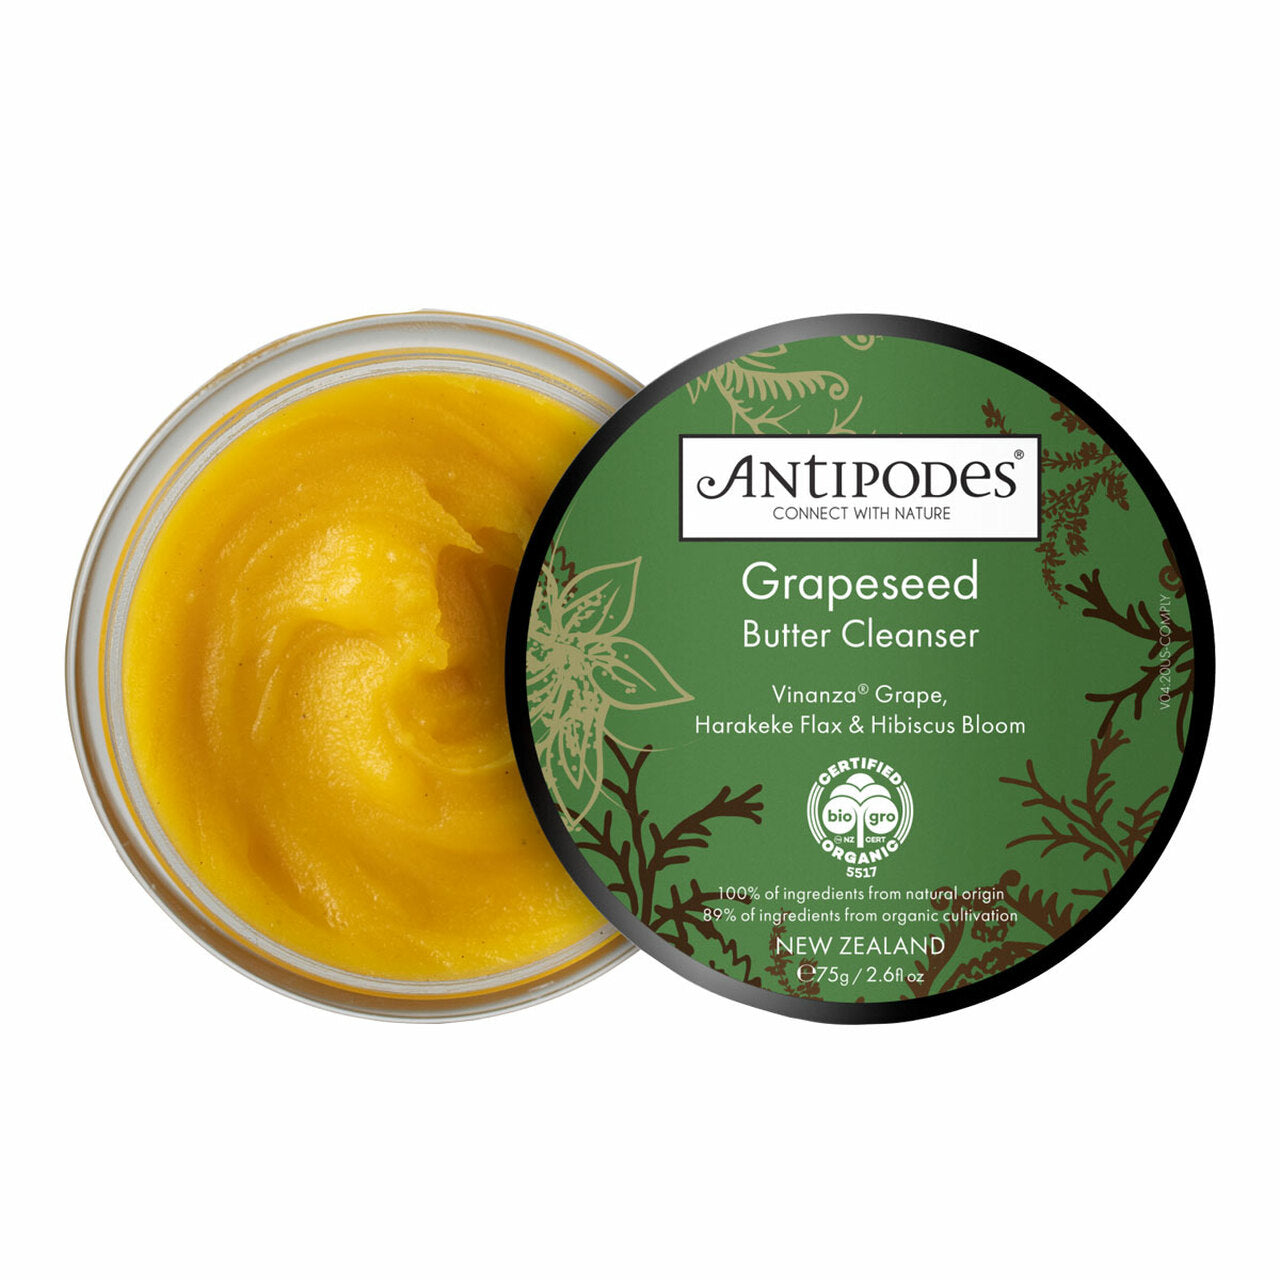 Antipodes Grapeseed Butter Cleanser 75g.